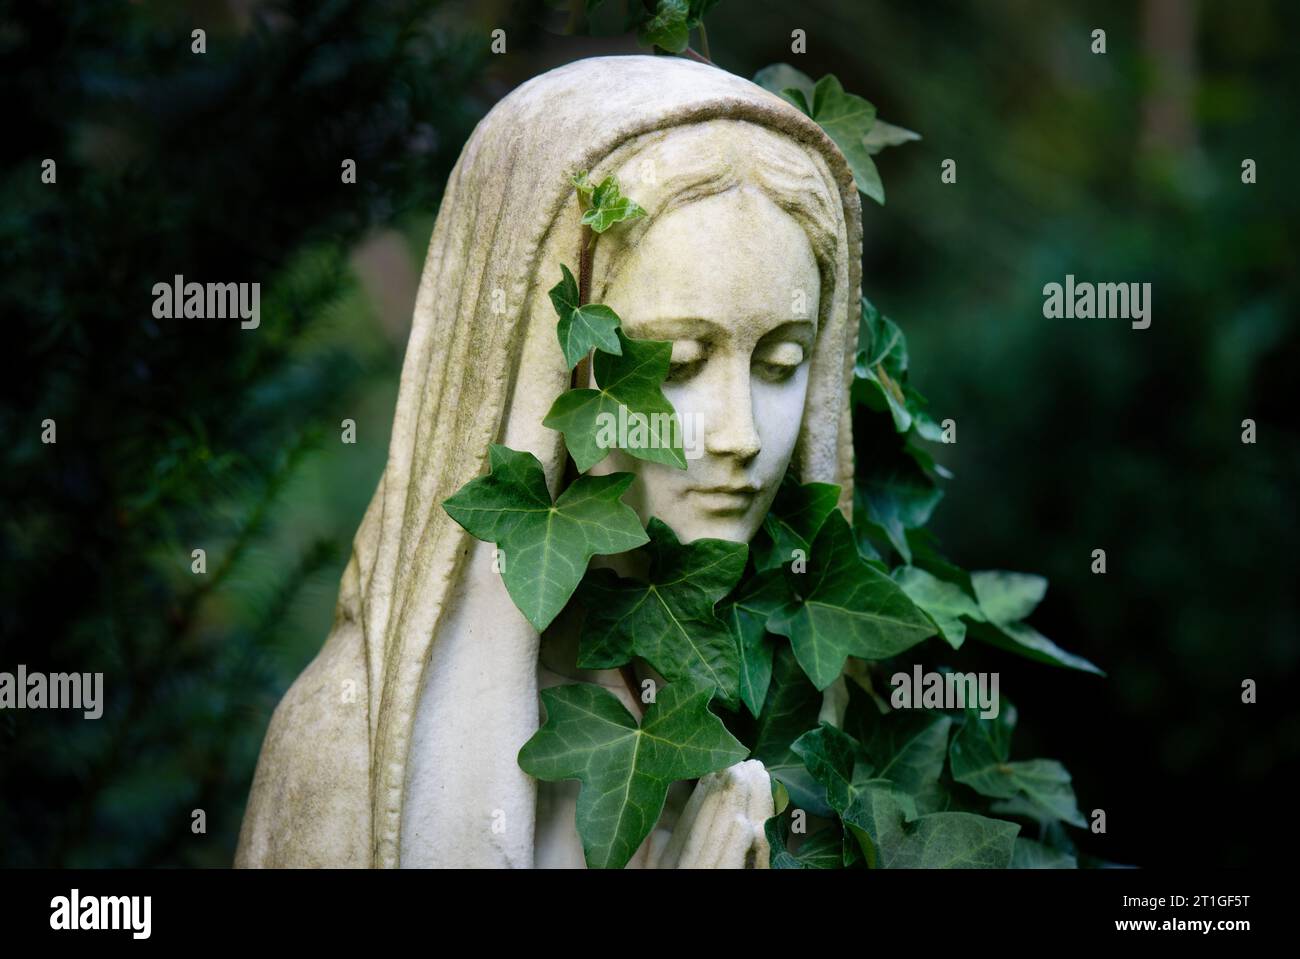 portrait of woman figure with headscarf and scarf made of ivy in a cemetery Stock Photo